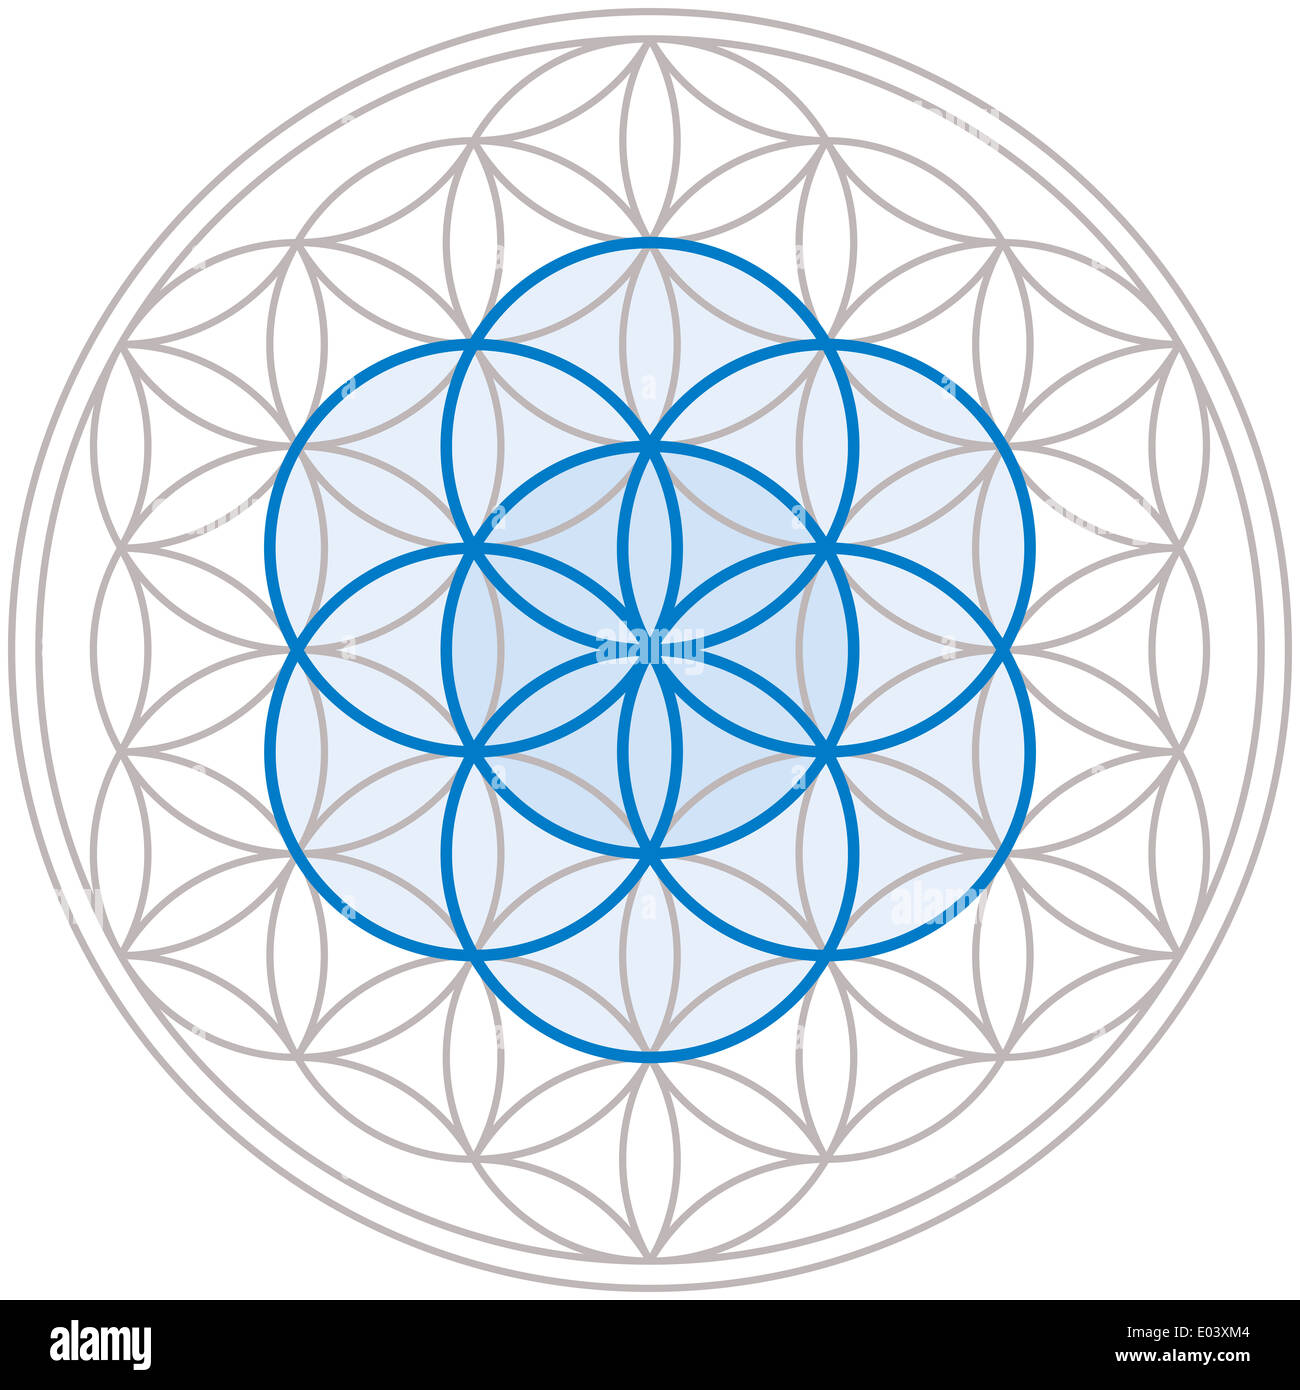 Seed Of Life In Flower Of Life Stock Photo